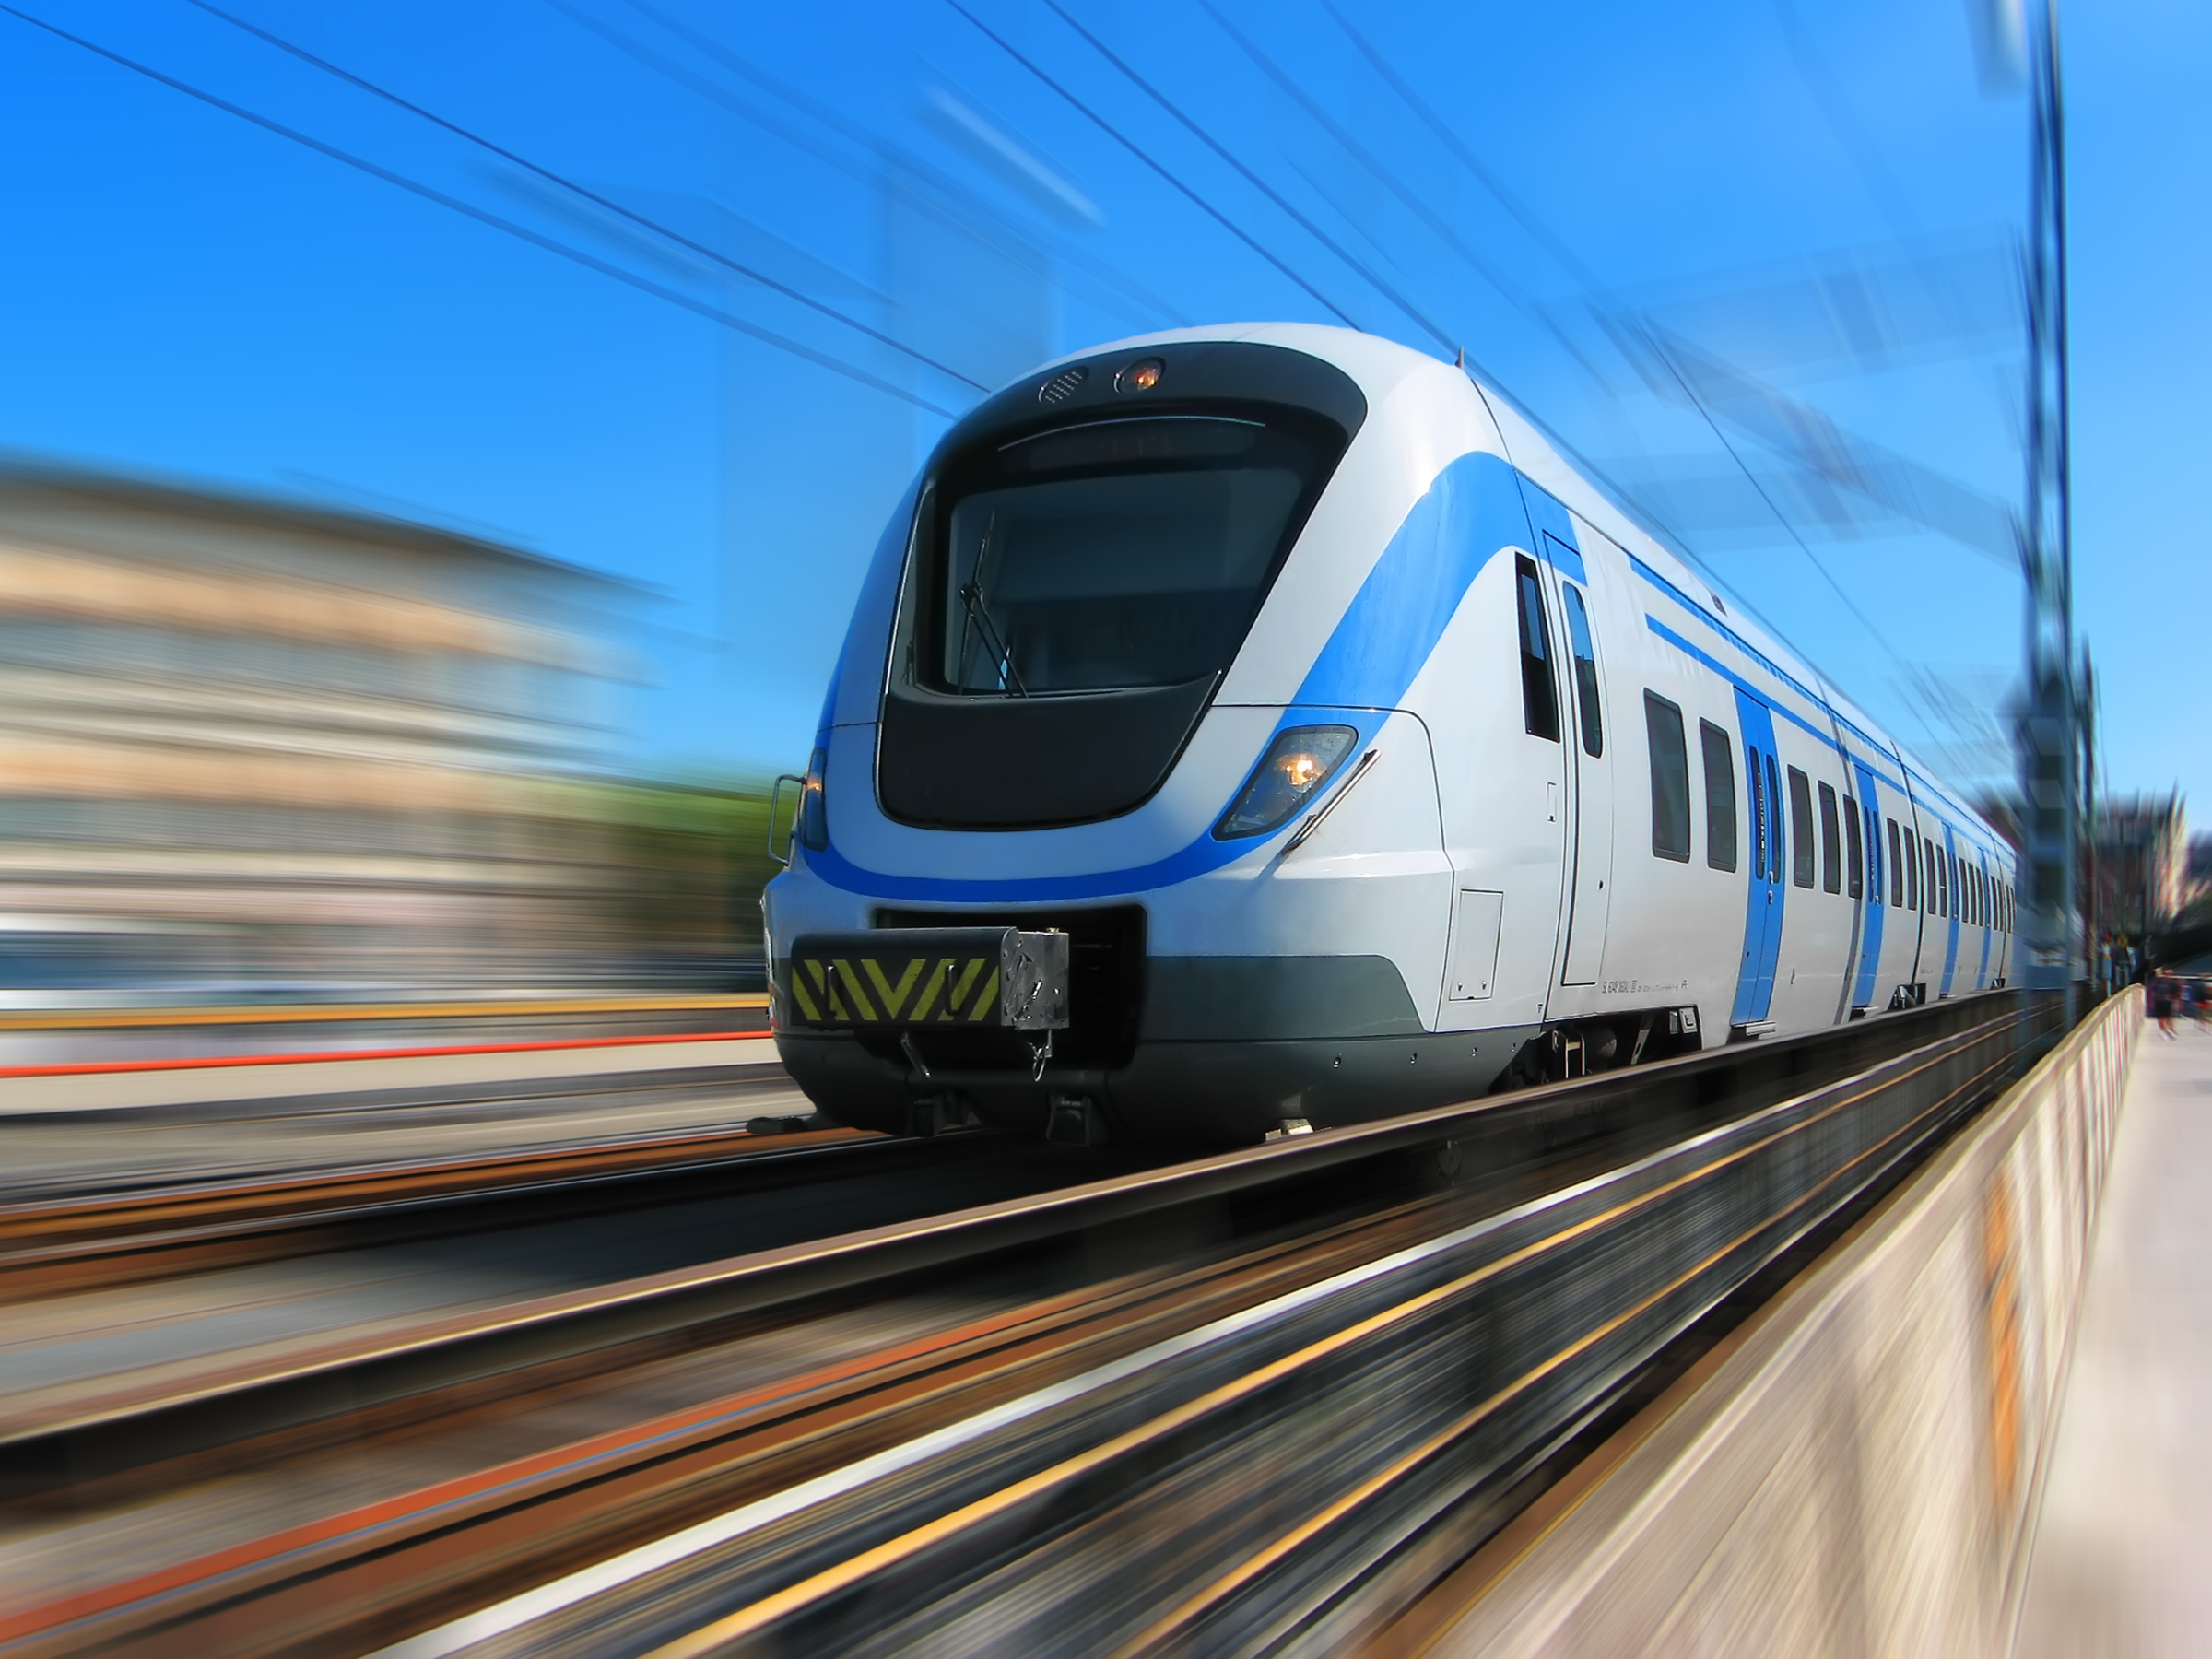 https://depositphotos.com/4284428/stock-photo-high-speed-train-with-motion.html